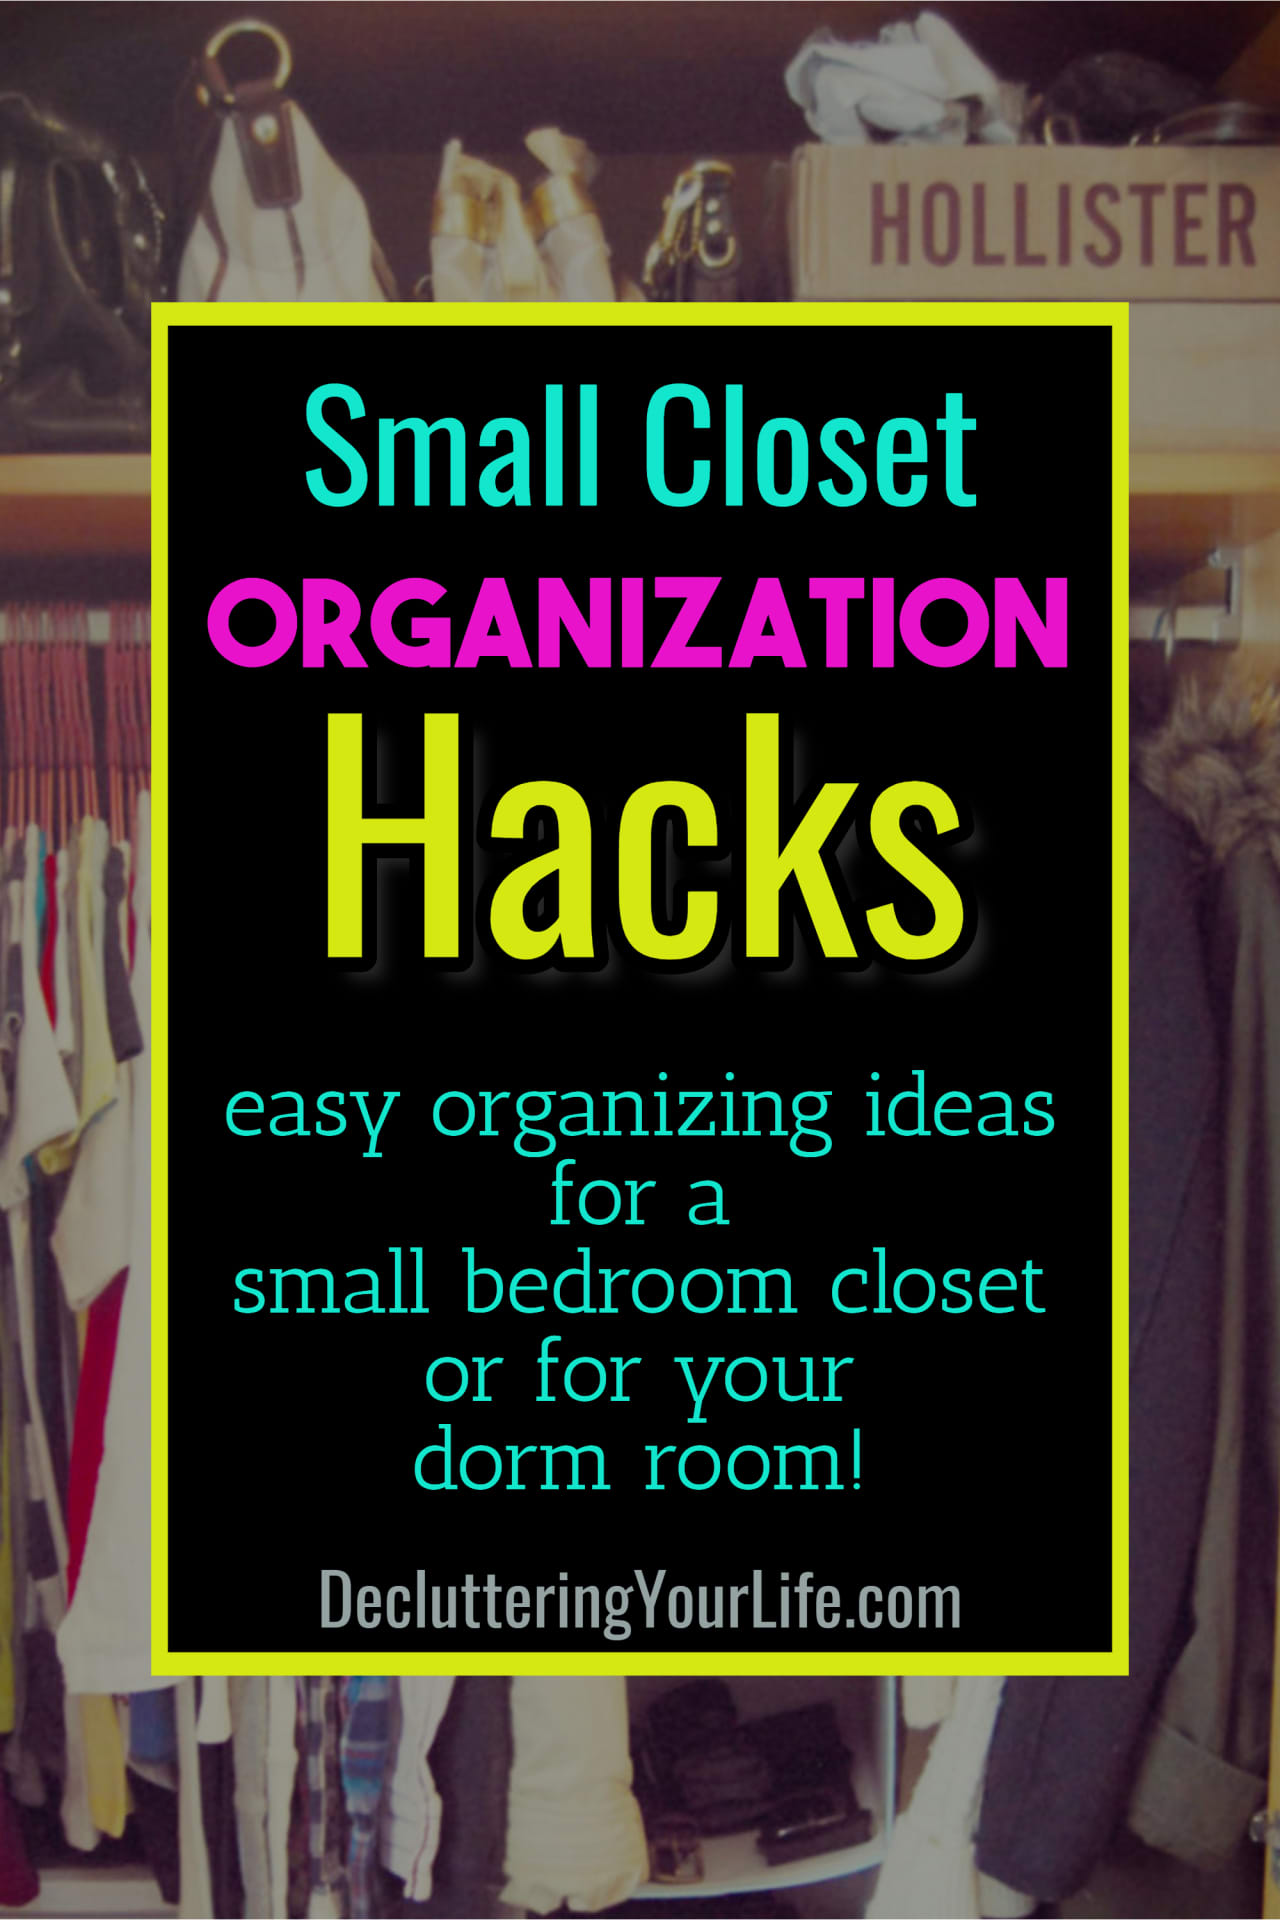 Space Saving Closet Ideas! How to organize a dorm room closet or small bedroom closet.  These dorm room space saving ideas are brilliant dorm organization hacks and college form storage hacks.  Try these creative storage ideas for dorm rooms and dorm room tips and tricks - they work!